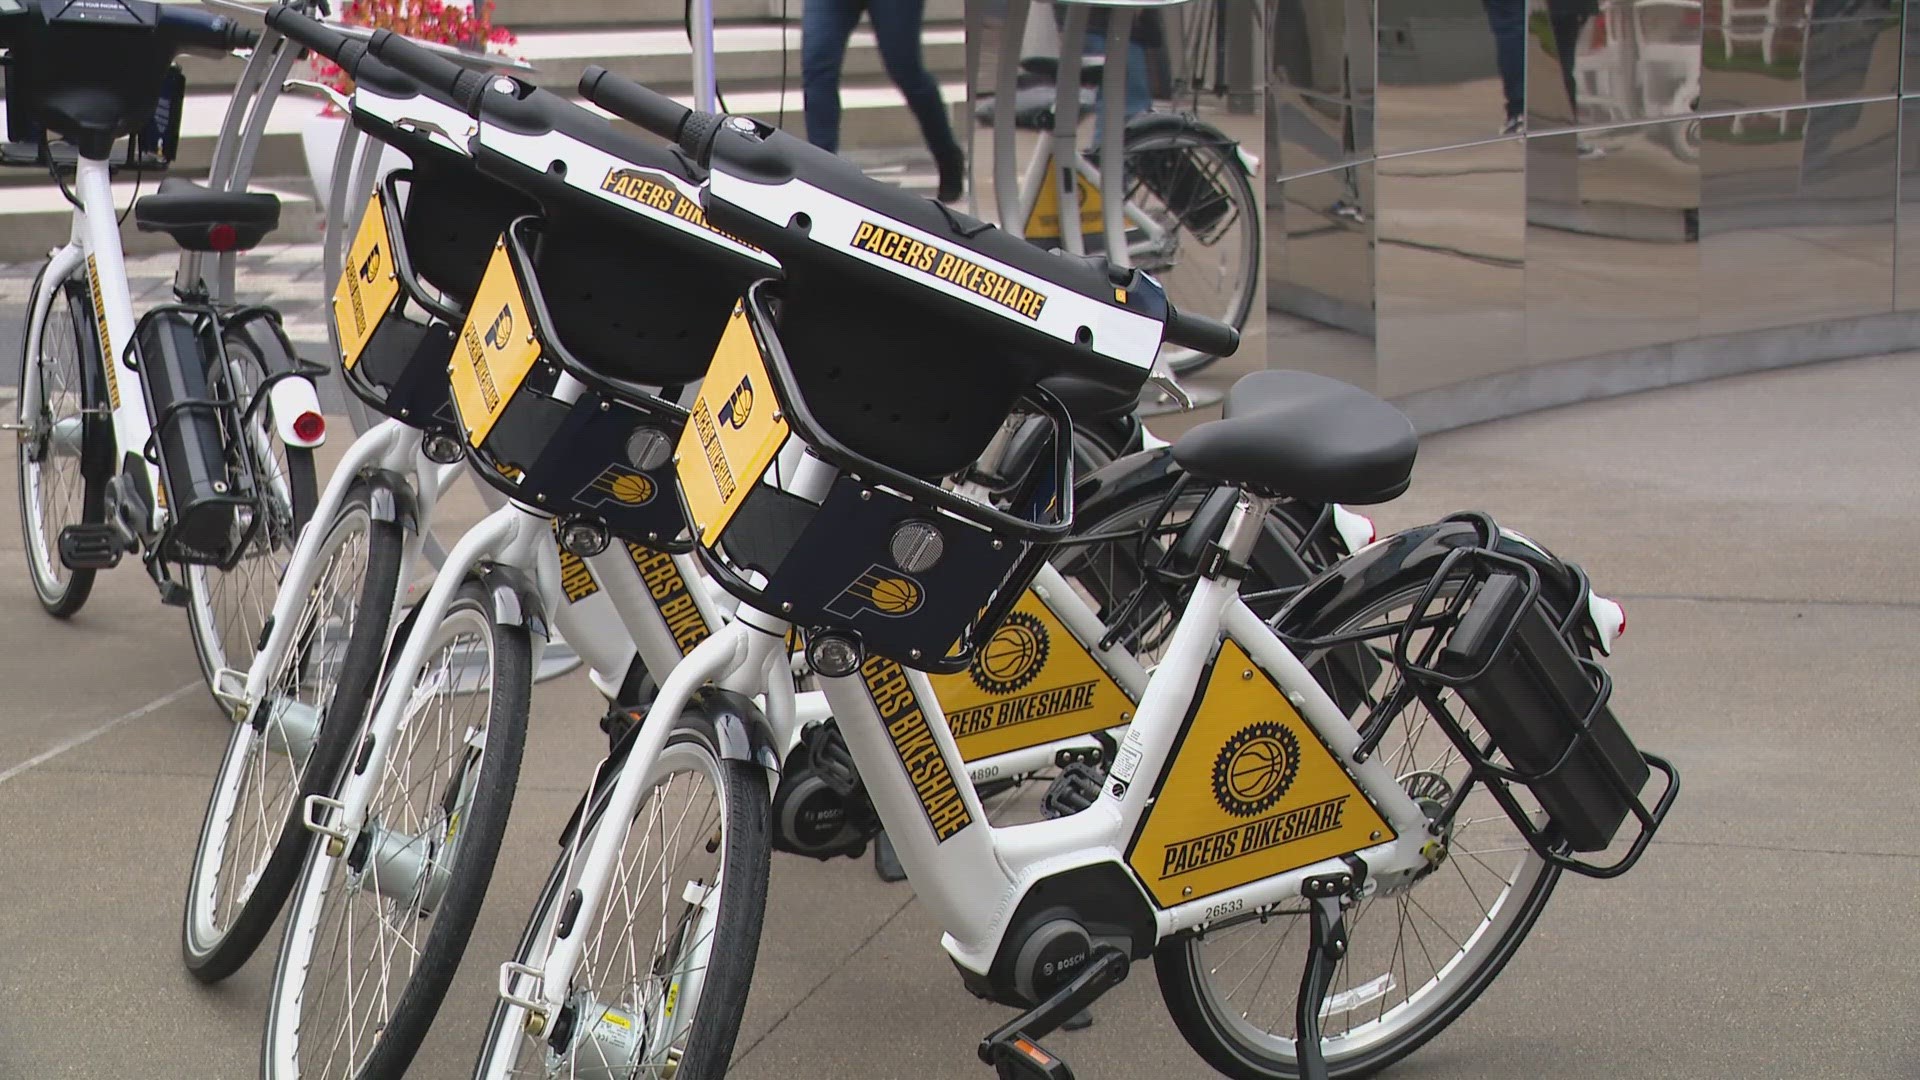 The Indiana Pacers Bikeshare Program has 50 bike stations around the Cultural Trail and other spots downtown.